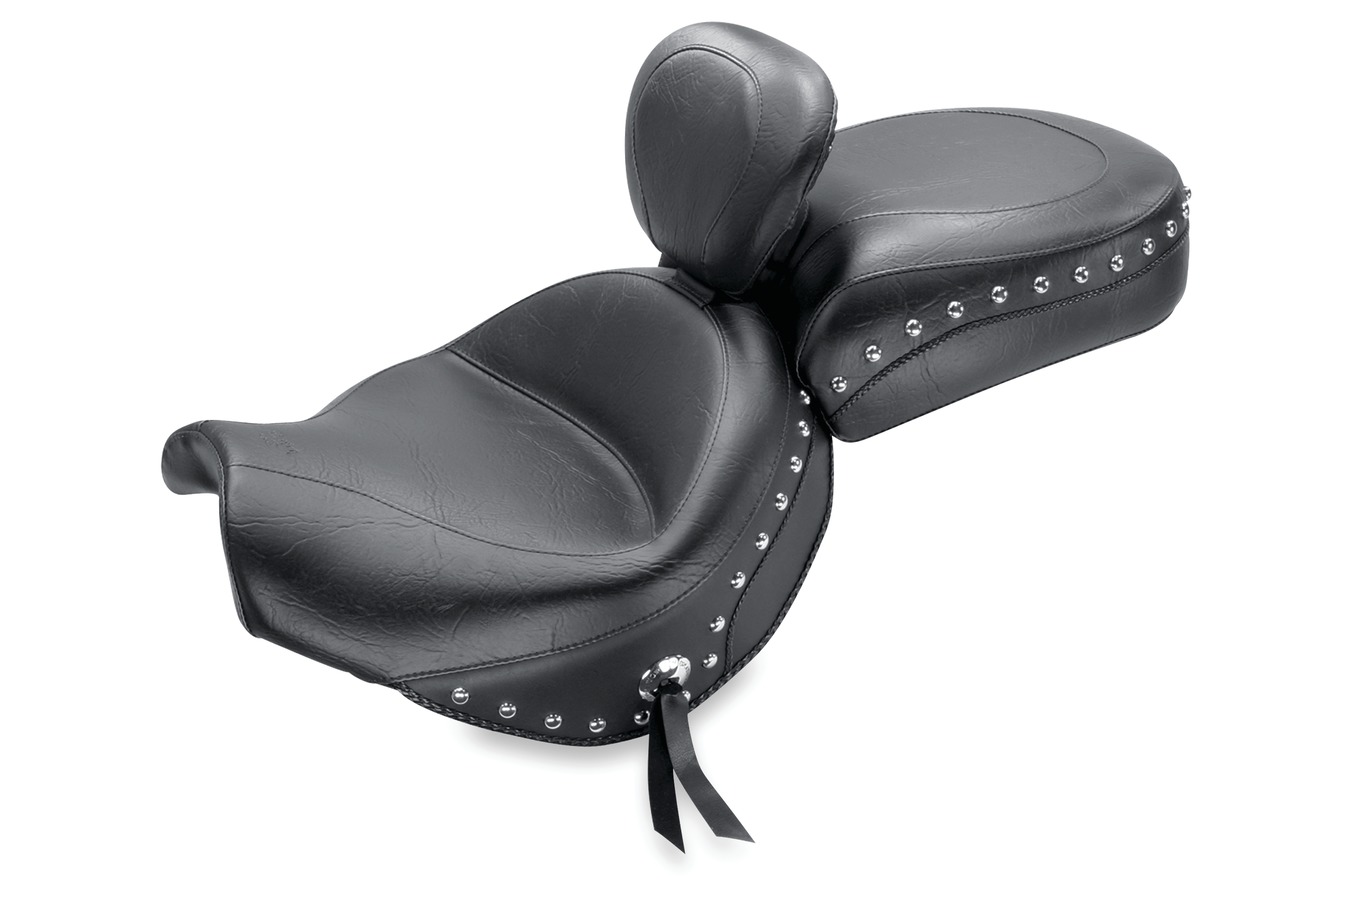 Standard Touring Two-Piece Seat with Driver Backrest for Kawasaki Vulcan 2000 Classic & LT 2004-